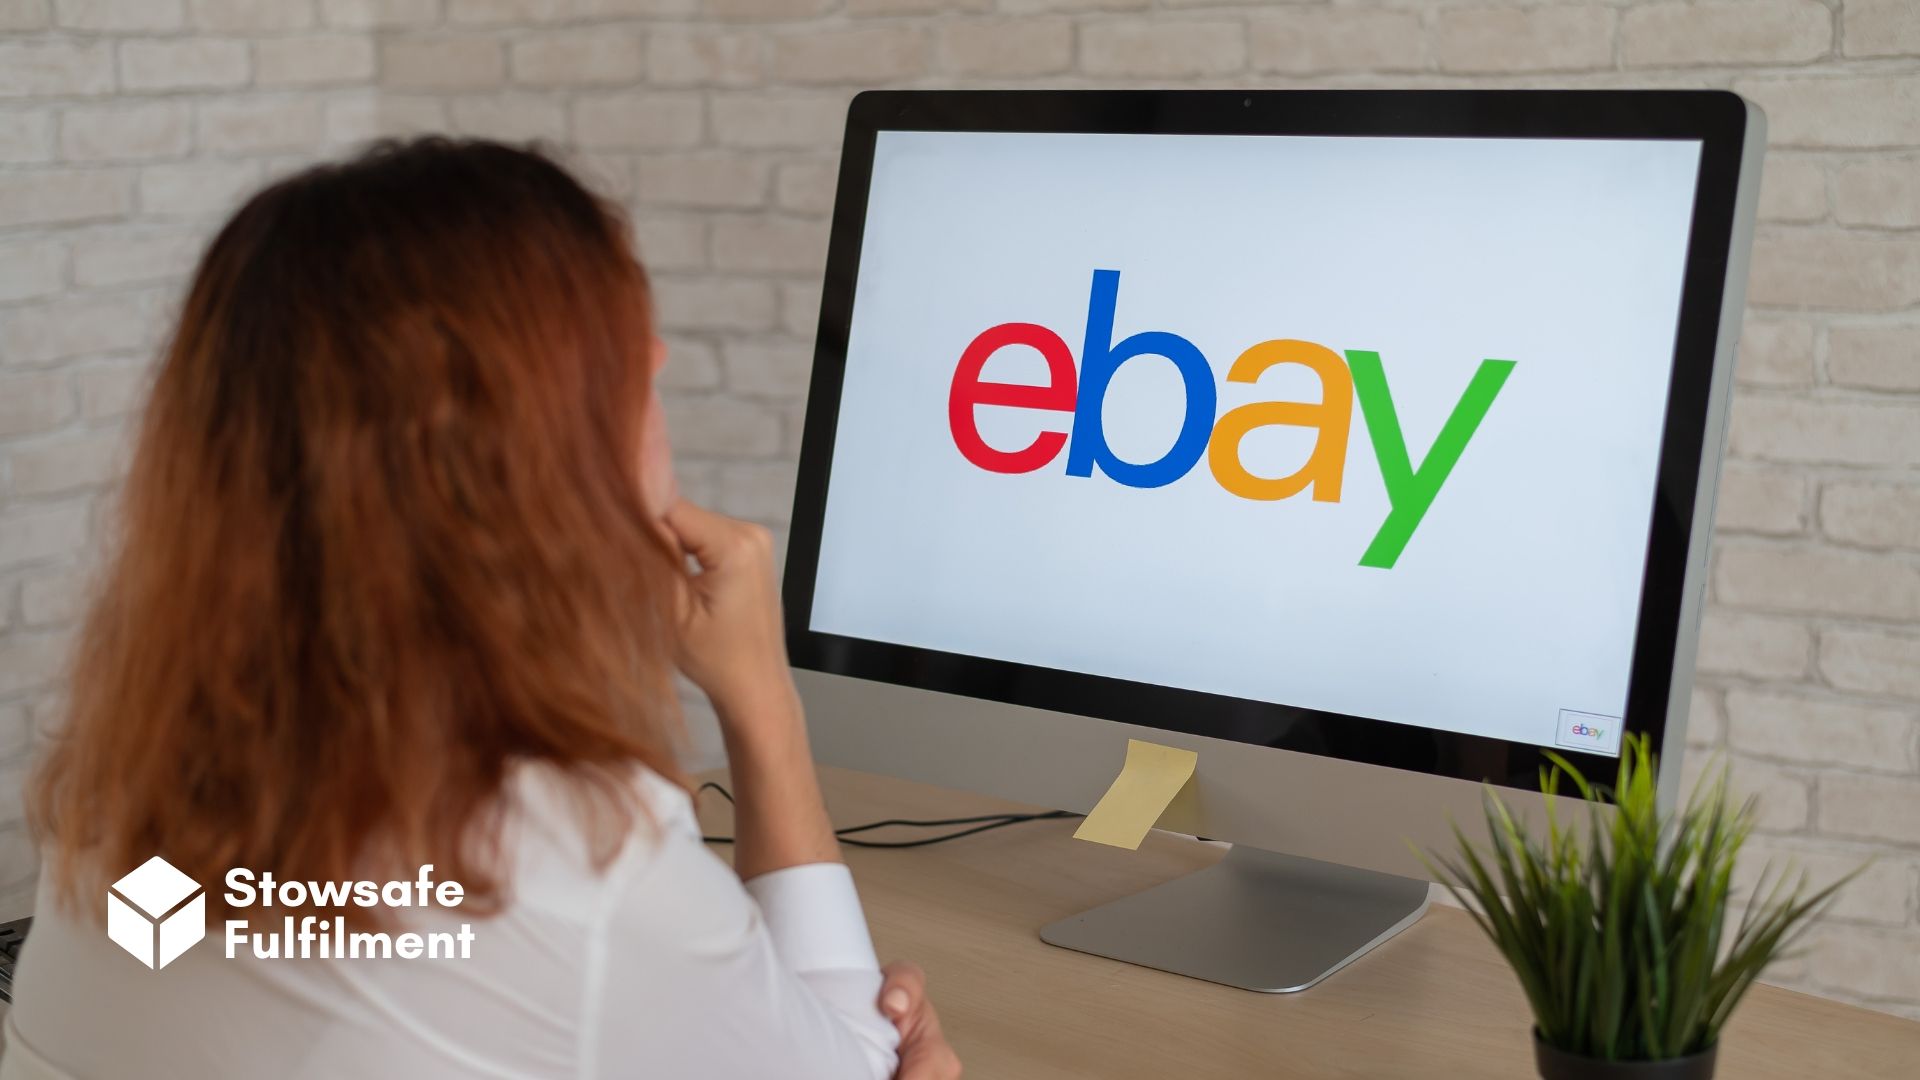 Learn how to craft eBay listings that sell with these top tips. We cover the basics so you can grow your business, stress-free.